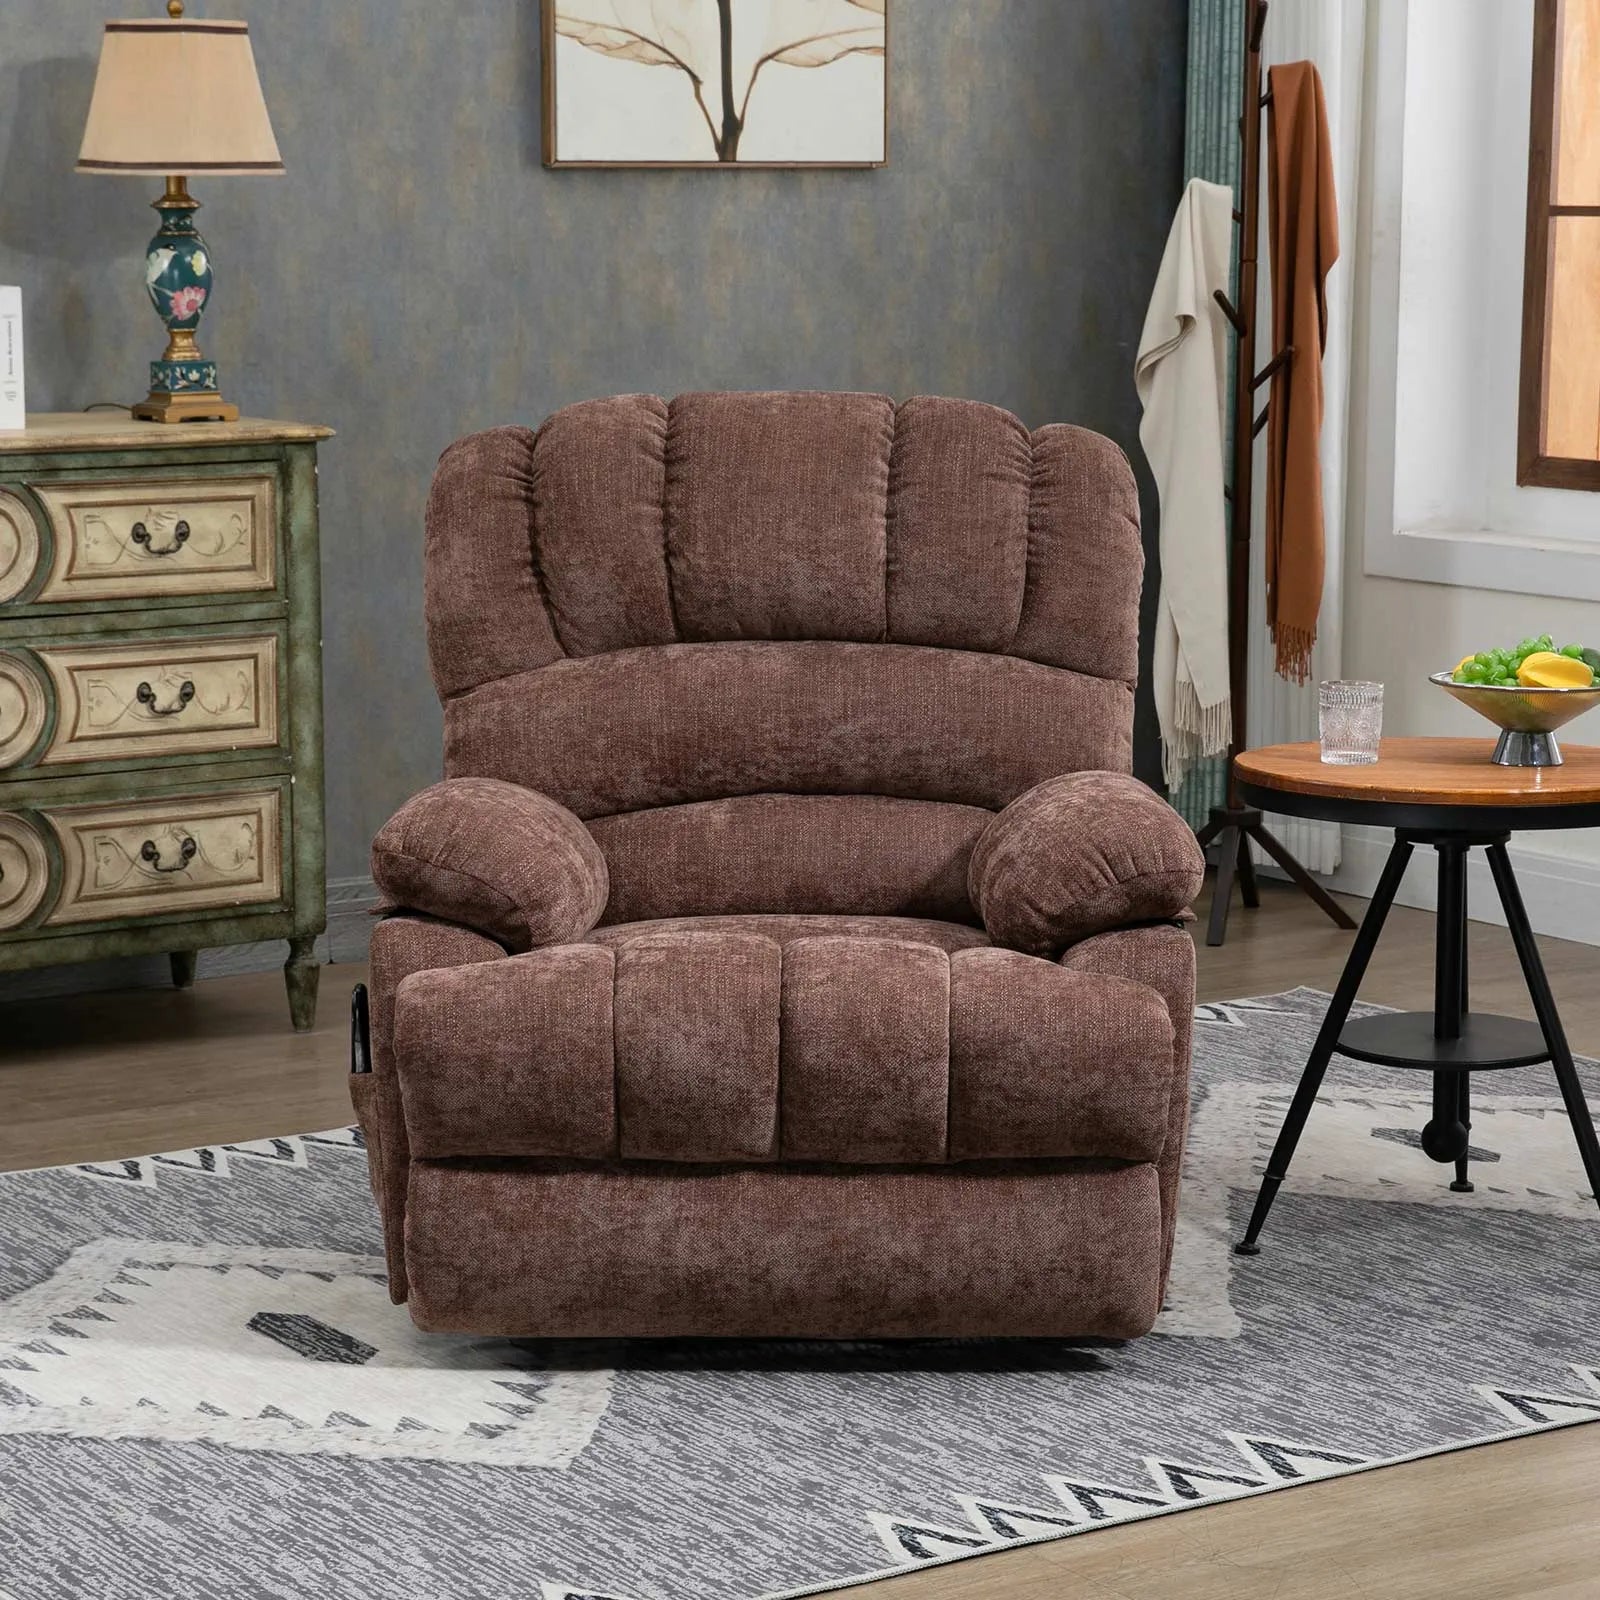 brown lift recliner chair for living room